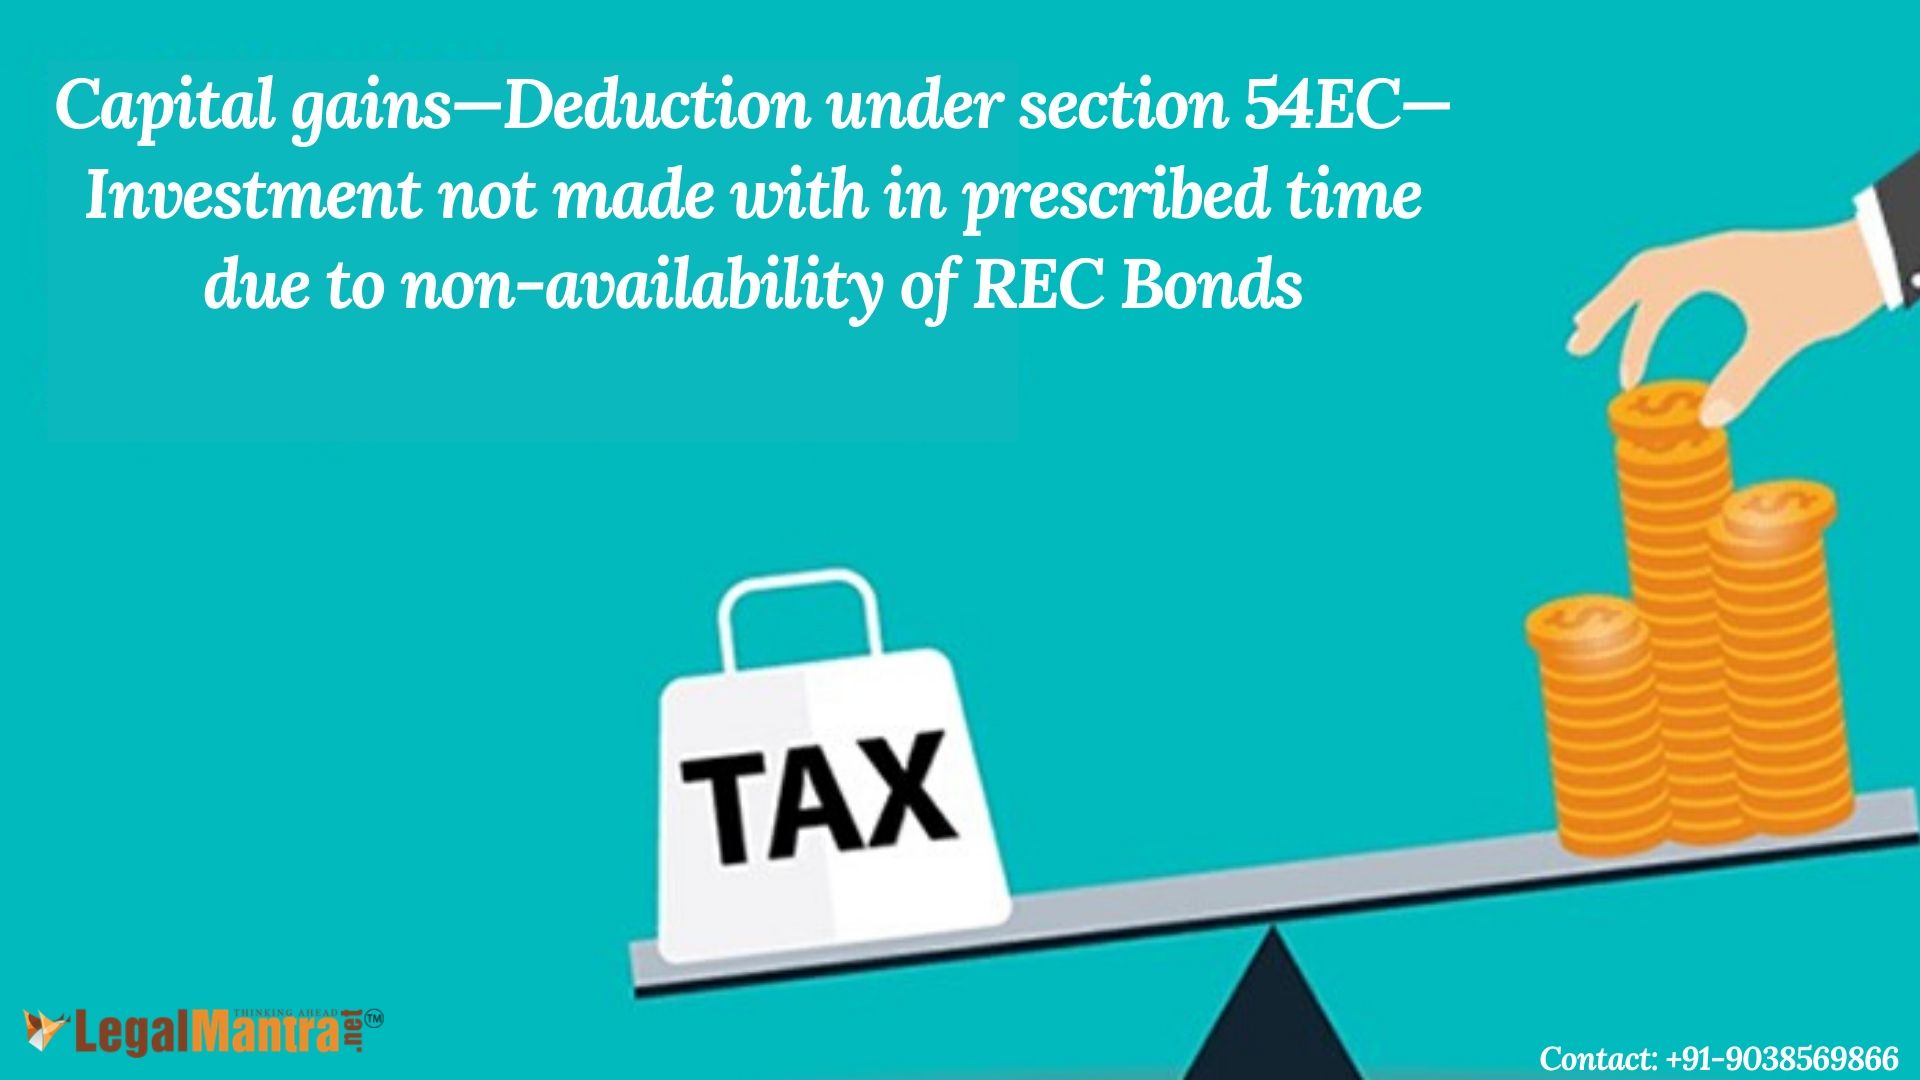 Capital gains—Deduction under section 54EC—Investment not made with in prescribed time due to non-availability of REC Bonds